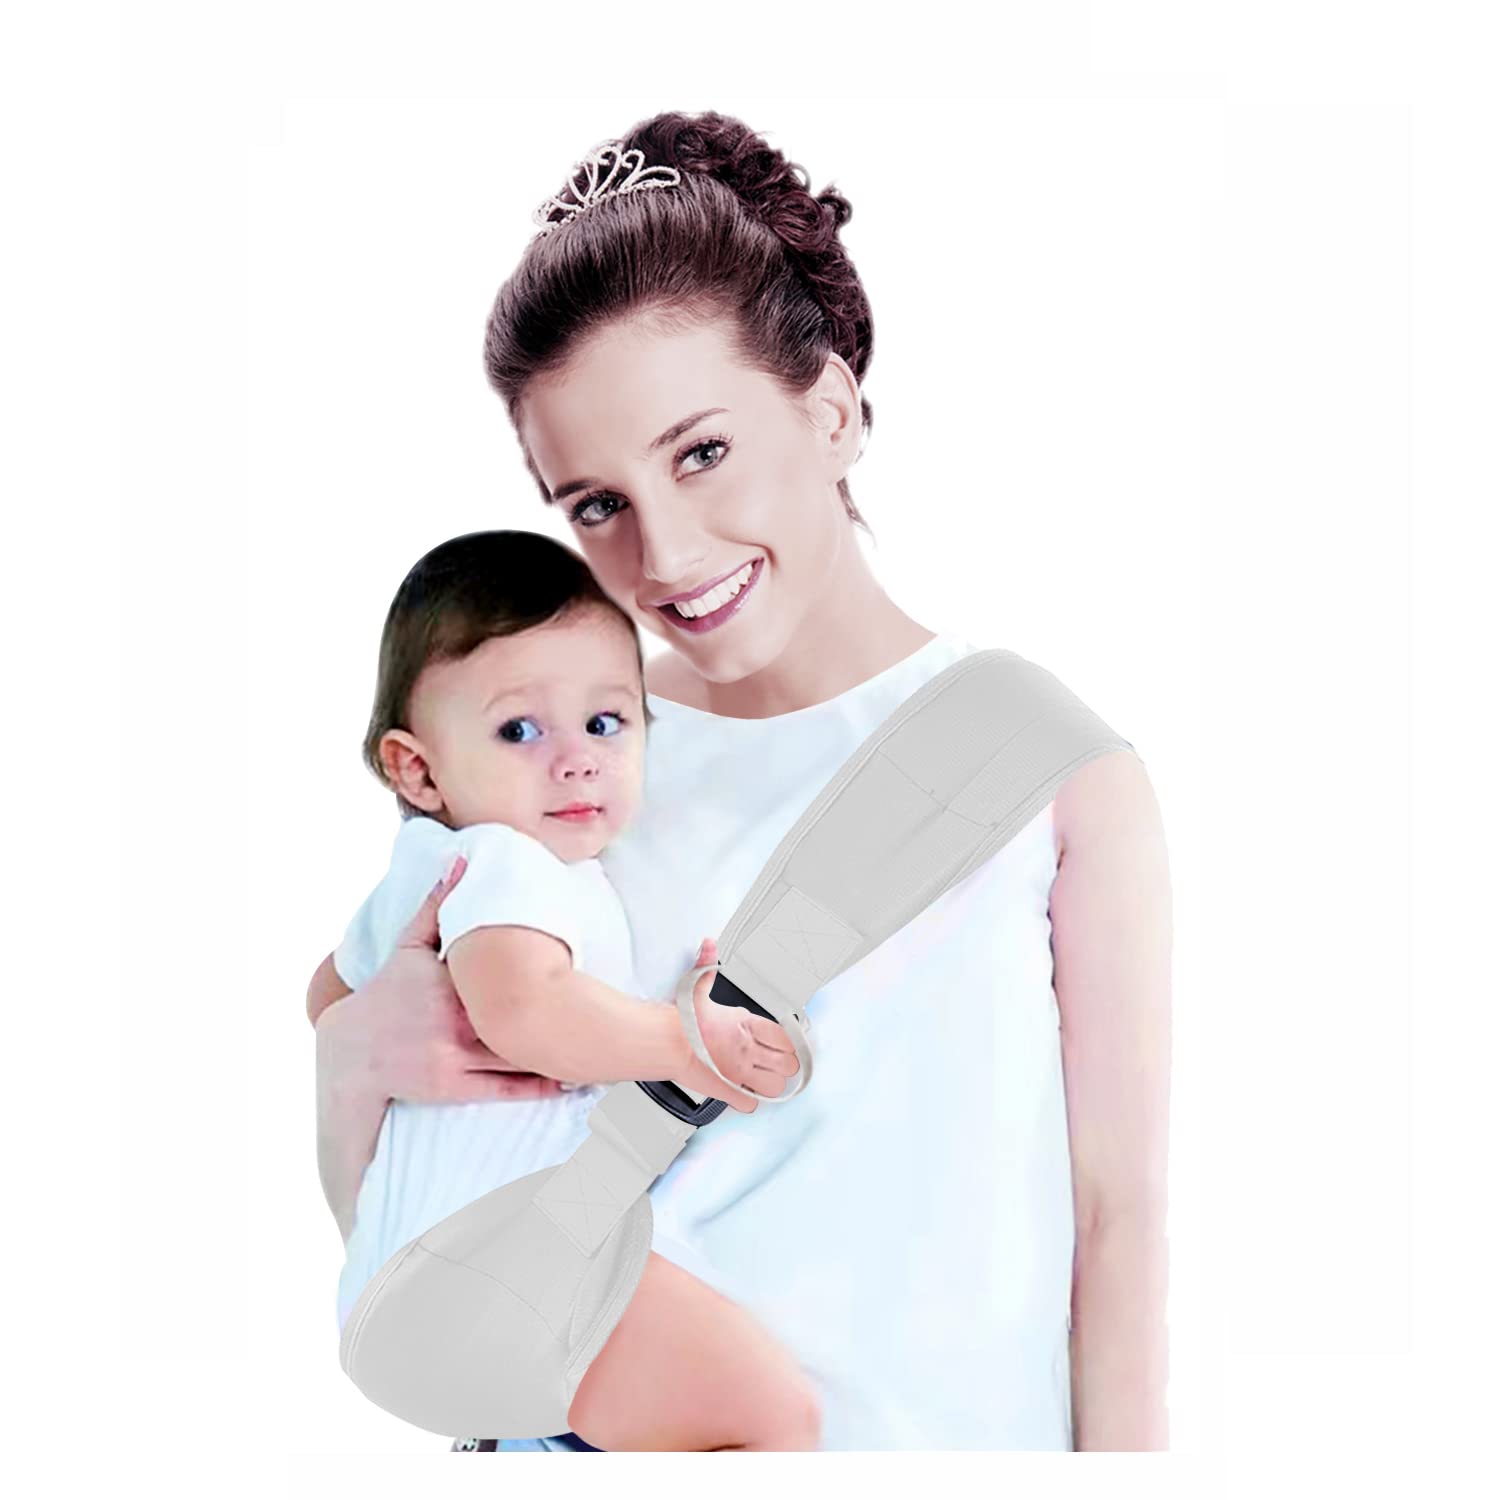 Portable Baby Carrier, Ergonomic Baby Strap one Shoulder Labor-Saving Polyester Baby Half Wrapped Sling with Anti-Slip Particles Soft Baby Straps for Newborn, Infant & Toddler, 4-36 Months (White)